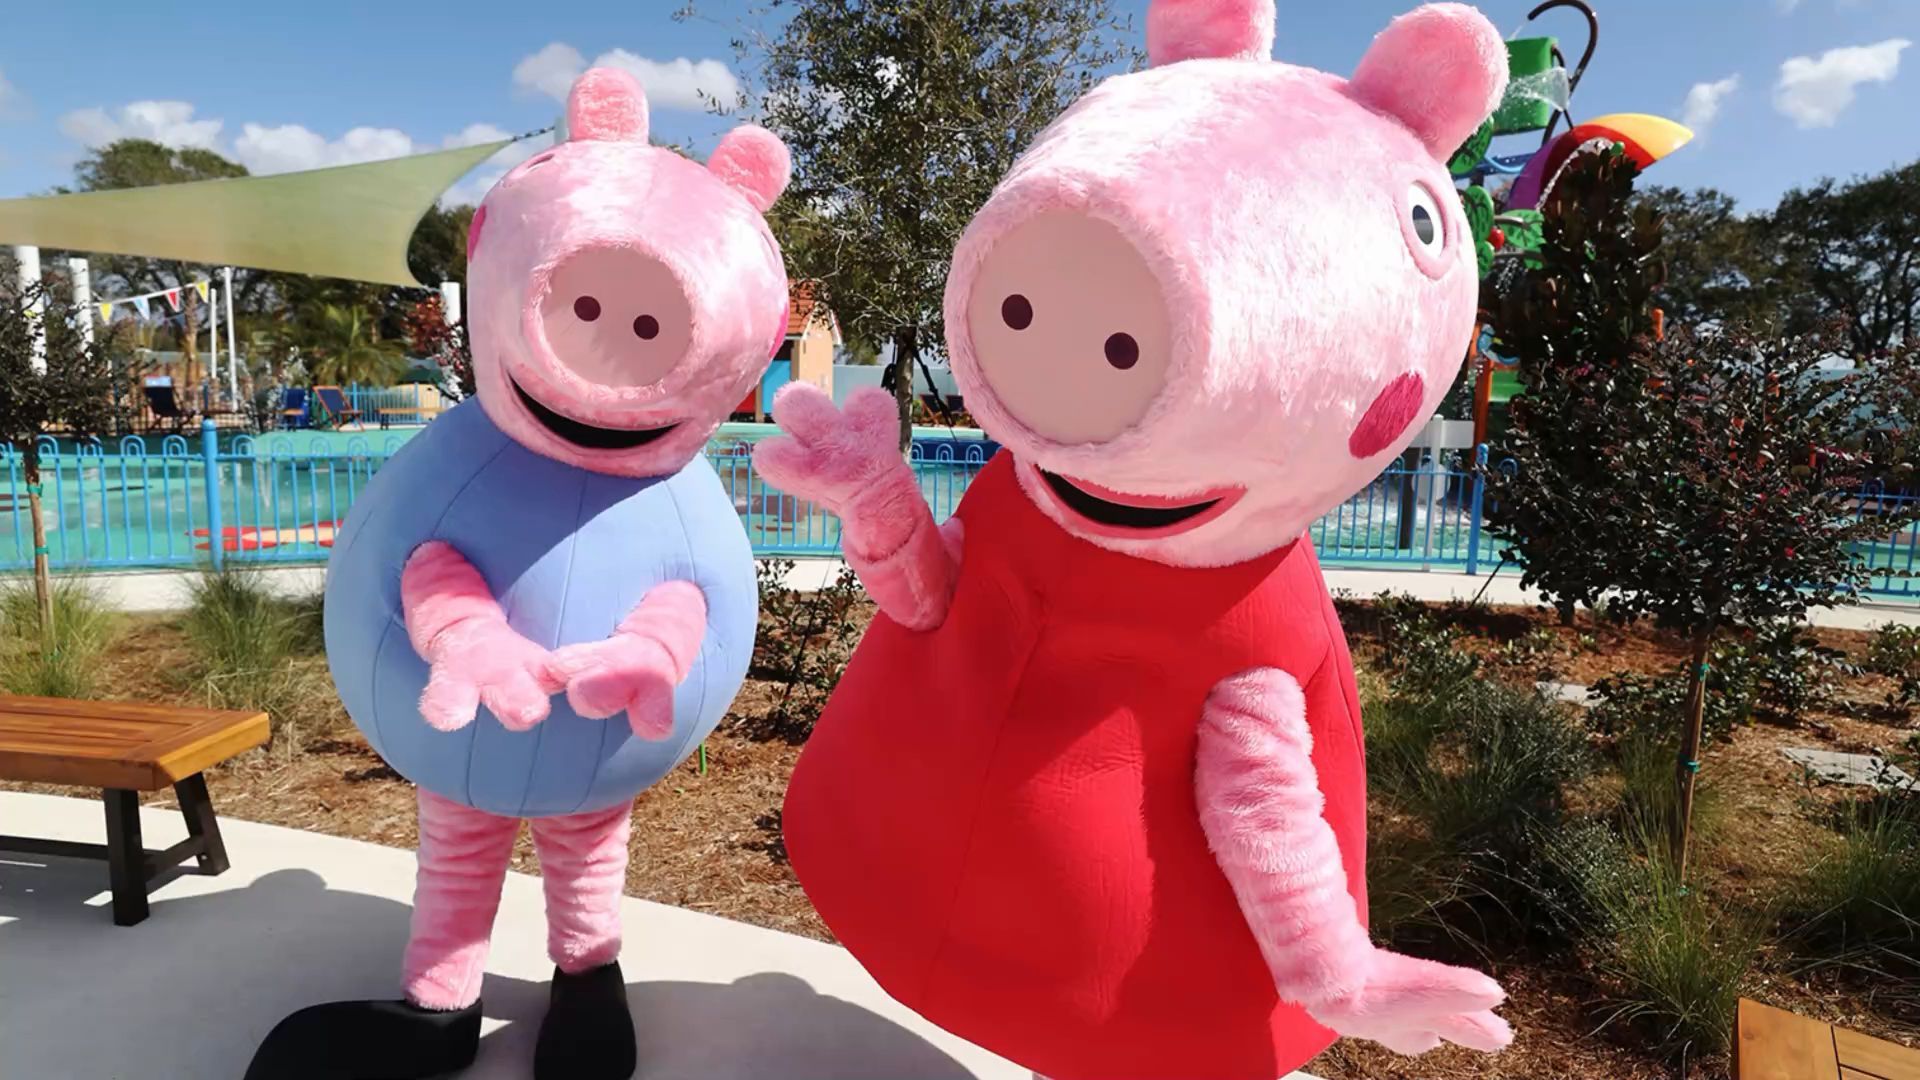 The 1st Peppa Wutz amusement park in Germany will open very soon!